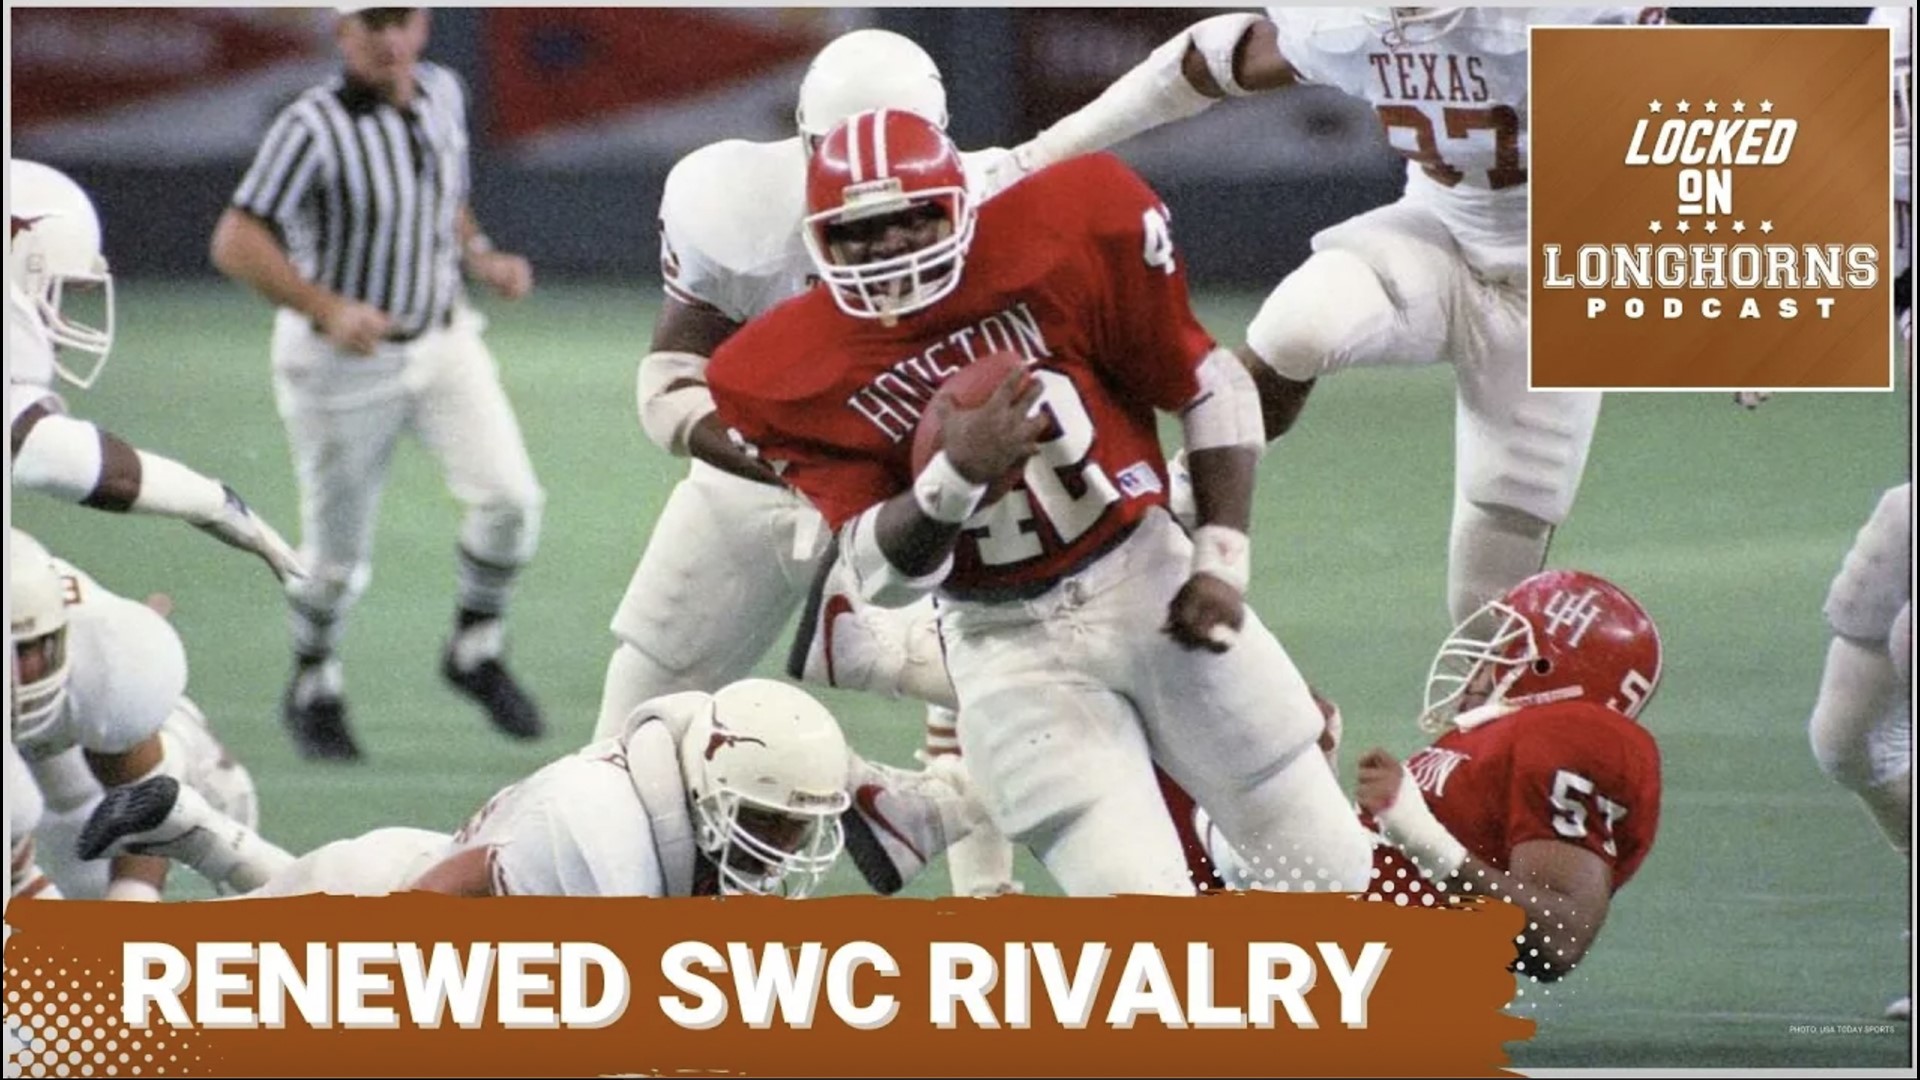 Long before the Big 12 and now impending SEC days, Texas and Houston had a rivalry in the old Southwest Conference that spanned for decades.